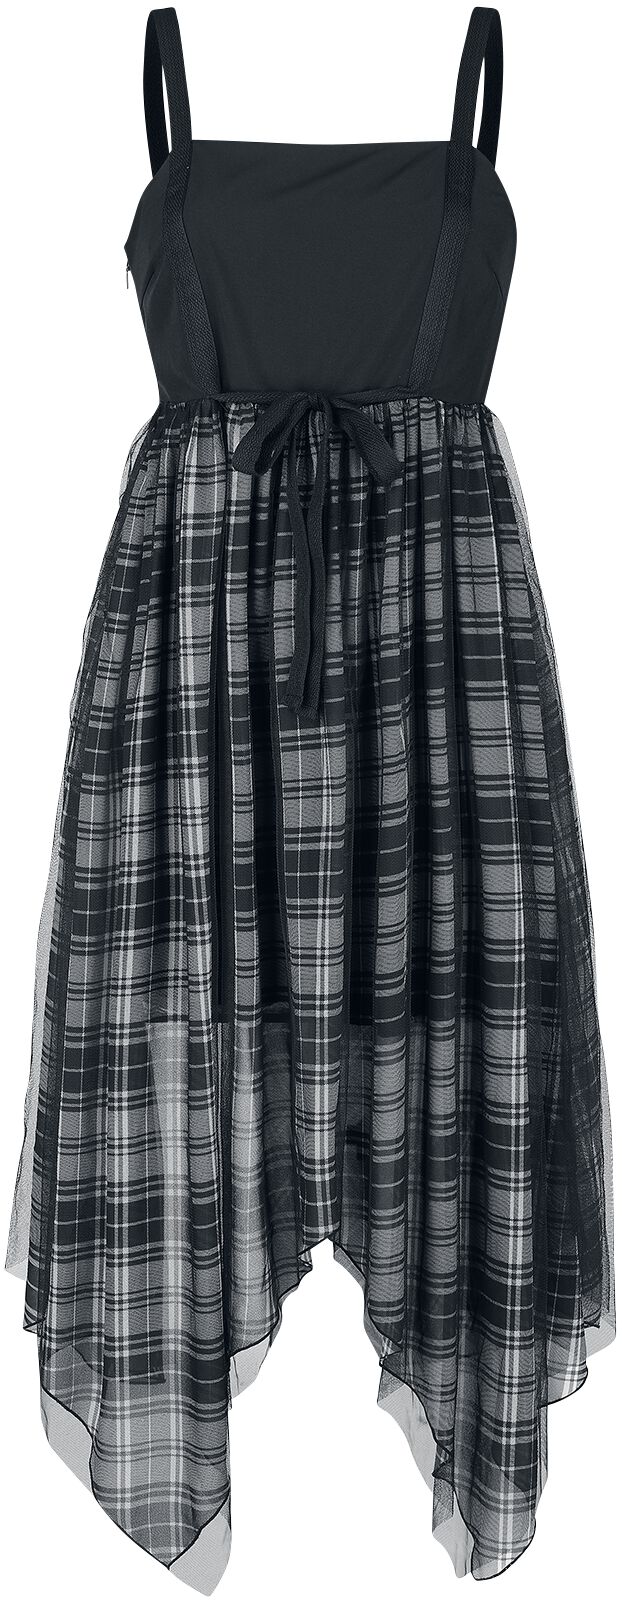 Image of Abito lungo di Rock Rebel by EMP - Dress with plaid tapered skirt - S a XL - Donna - nero/grigio